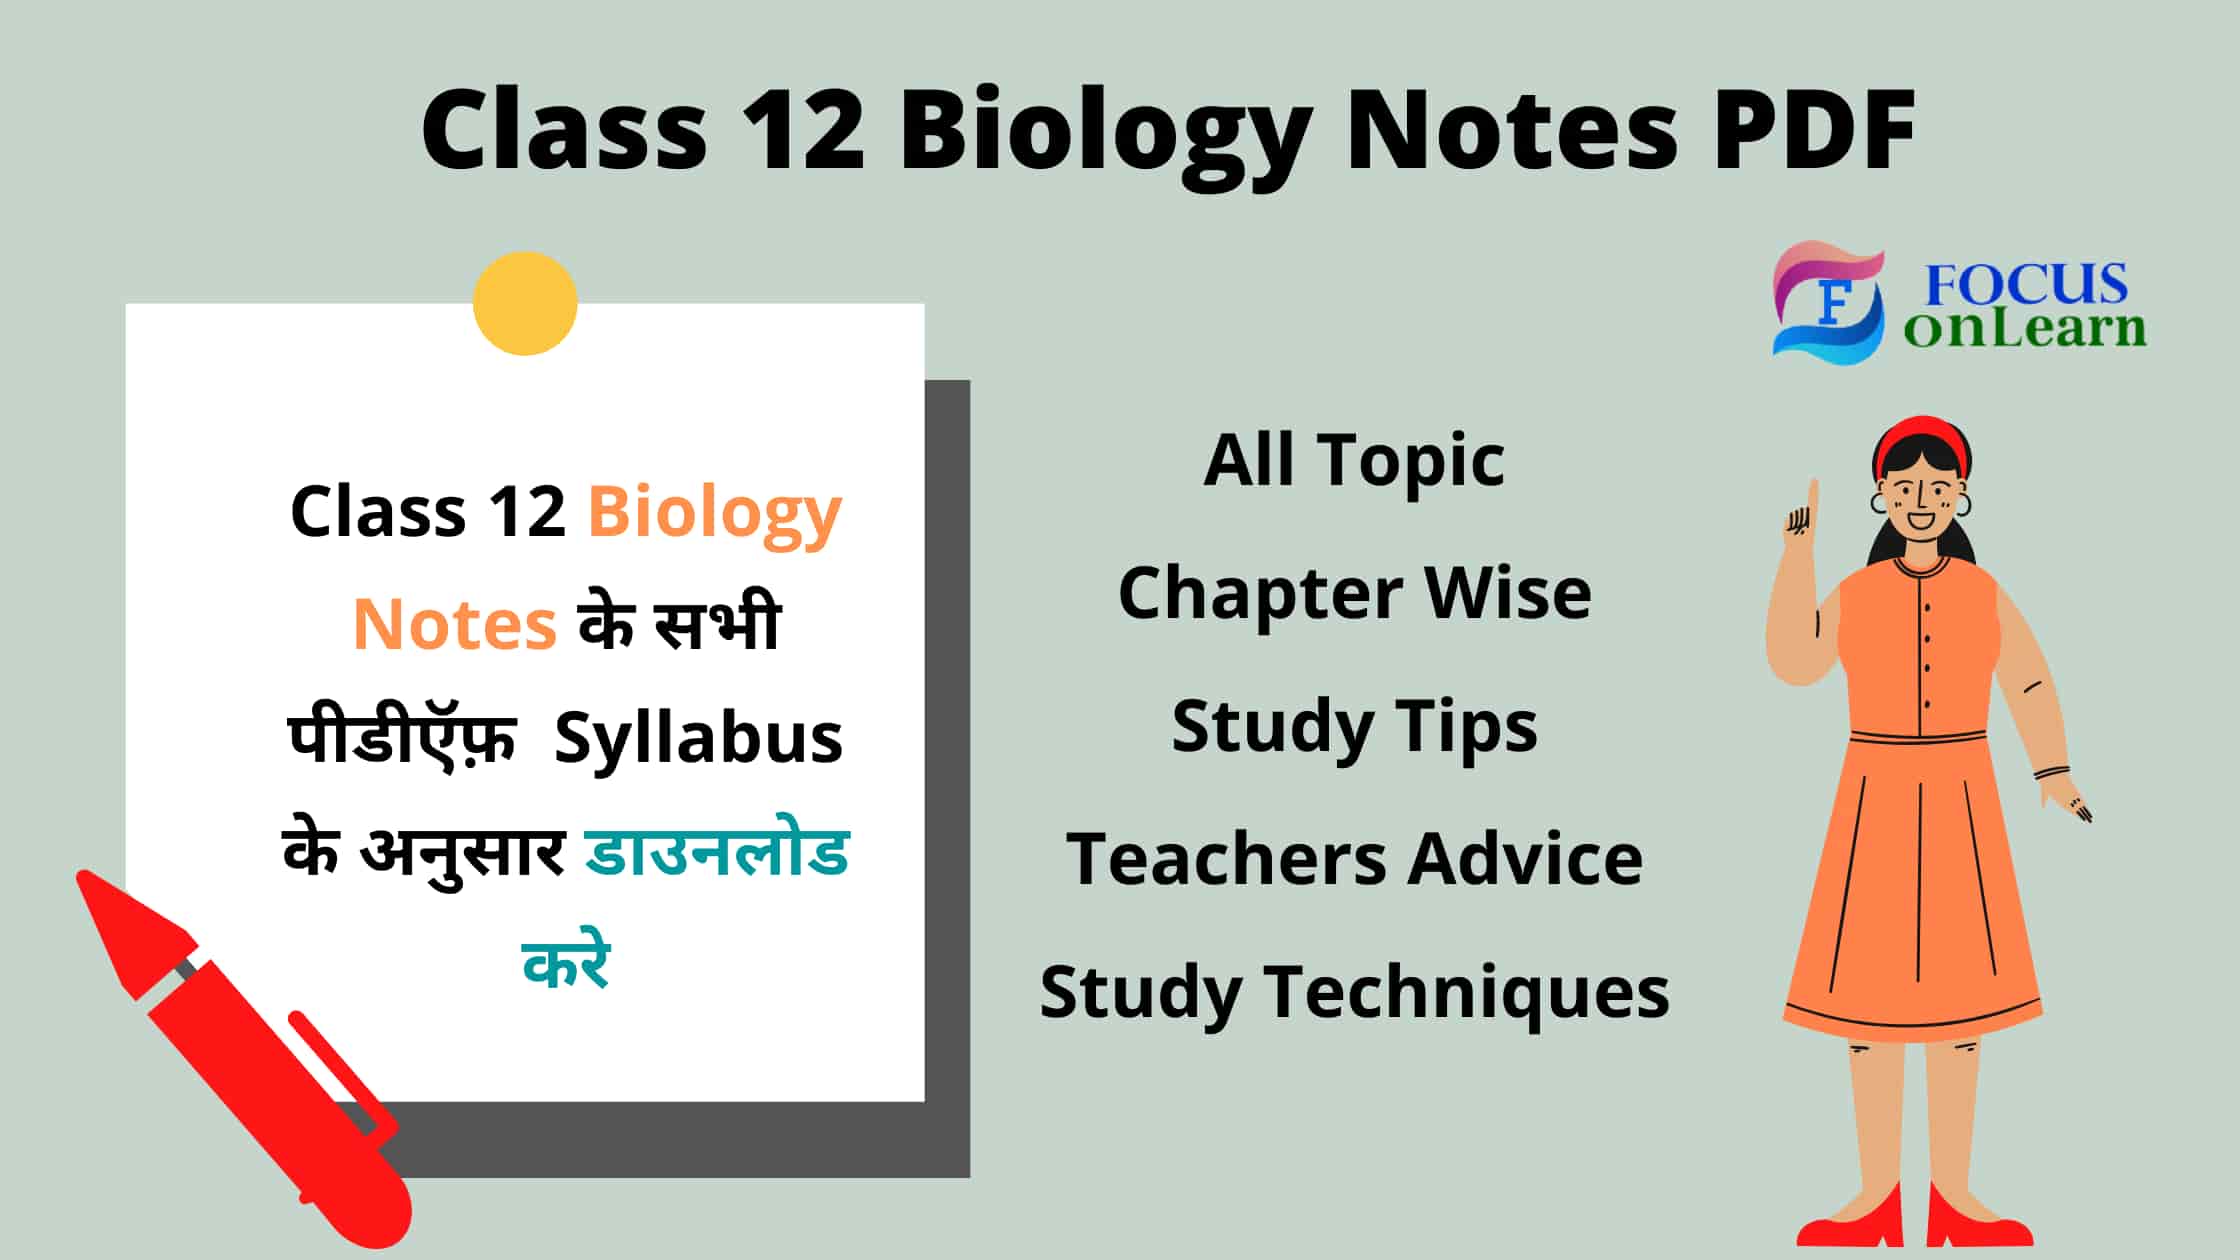 Class 12 Biology Notes PDF in Hindi